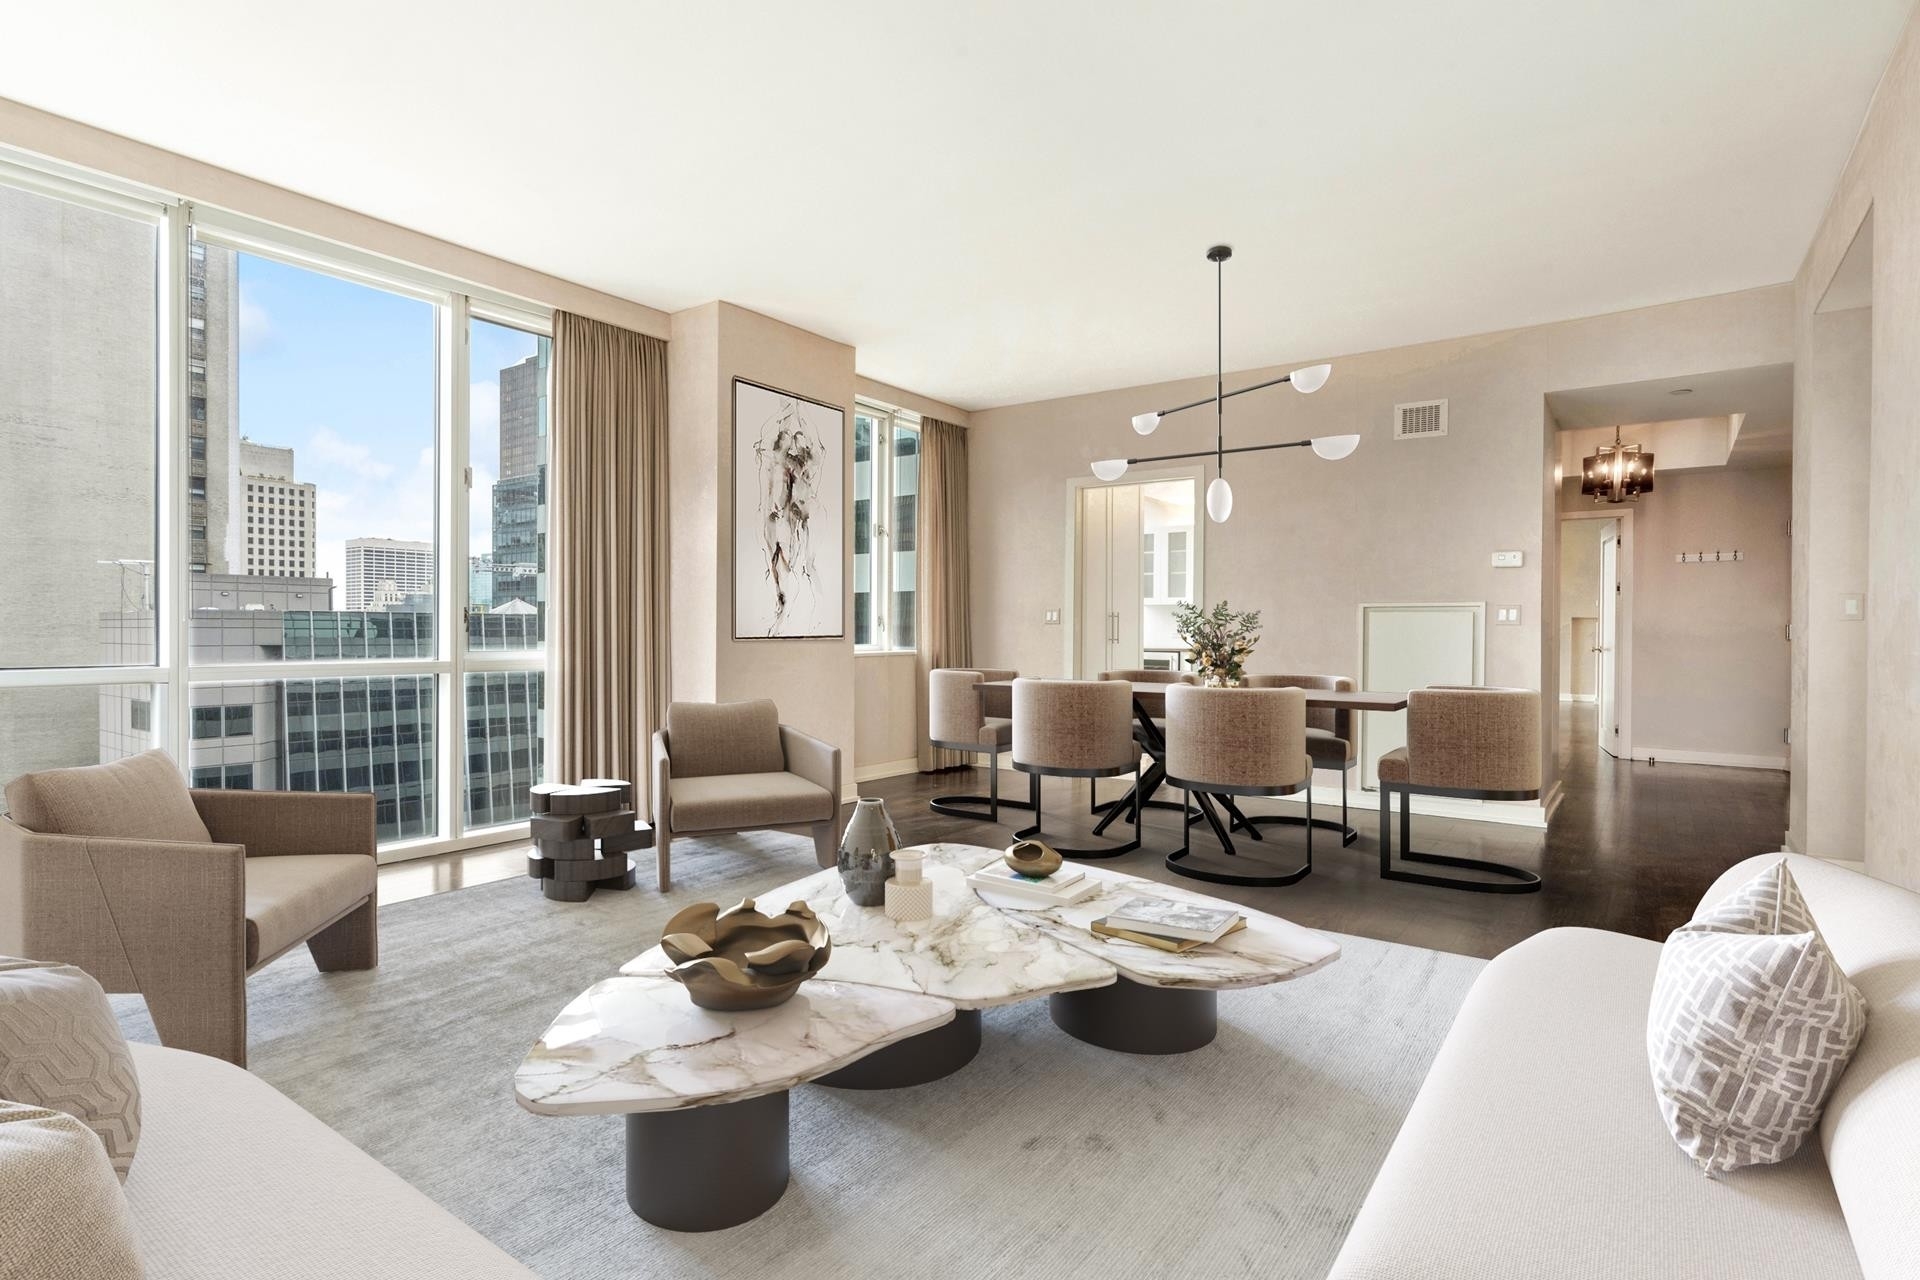 Condominium for Sale at Park Avenue Place, 60 E 55TH ST, 39B Midtown East, New York, NY 10022